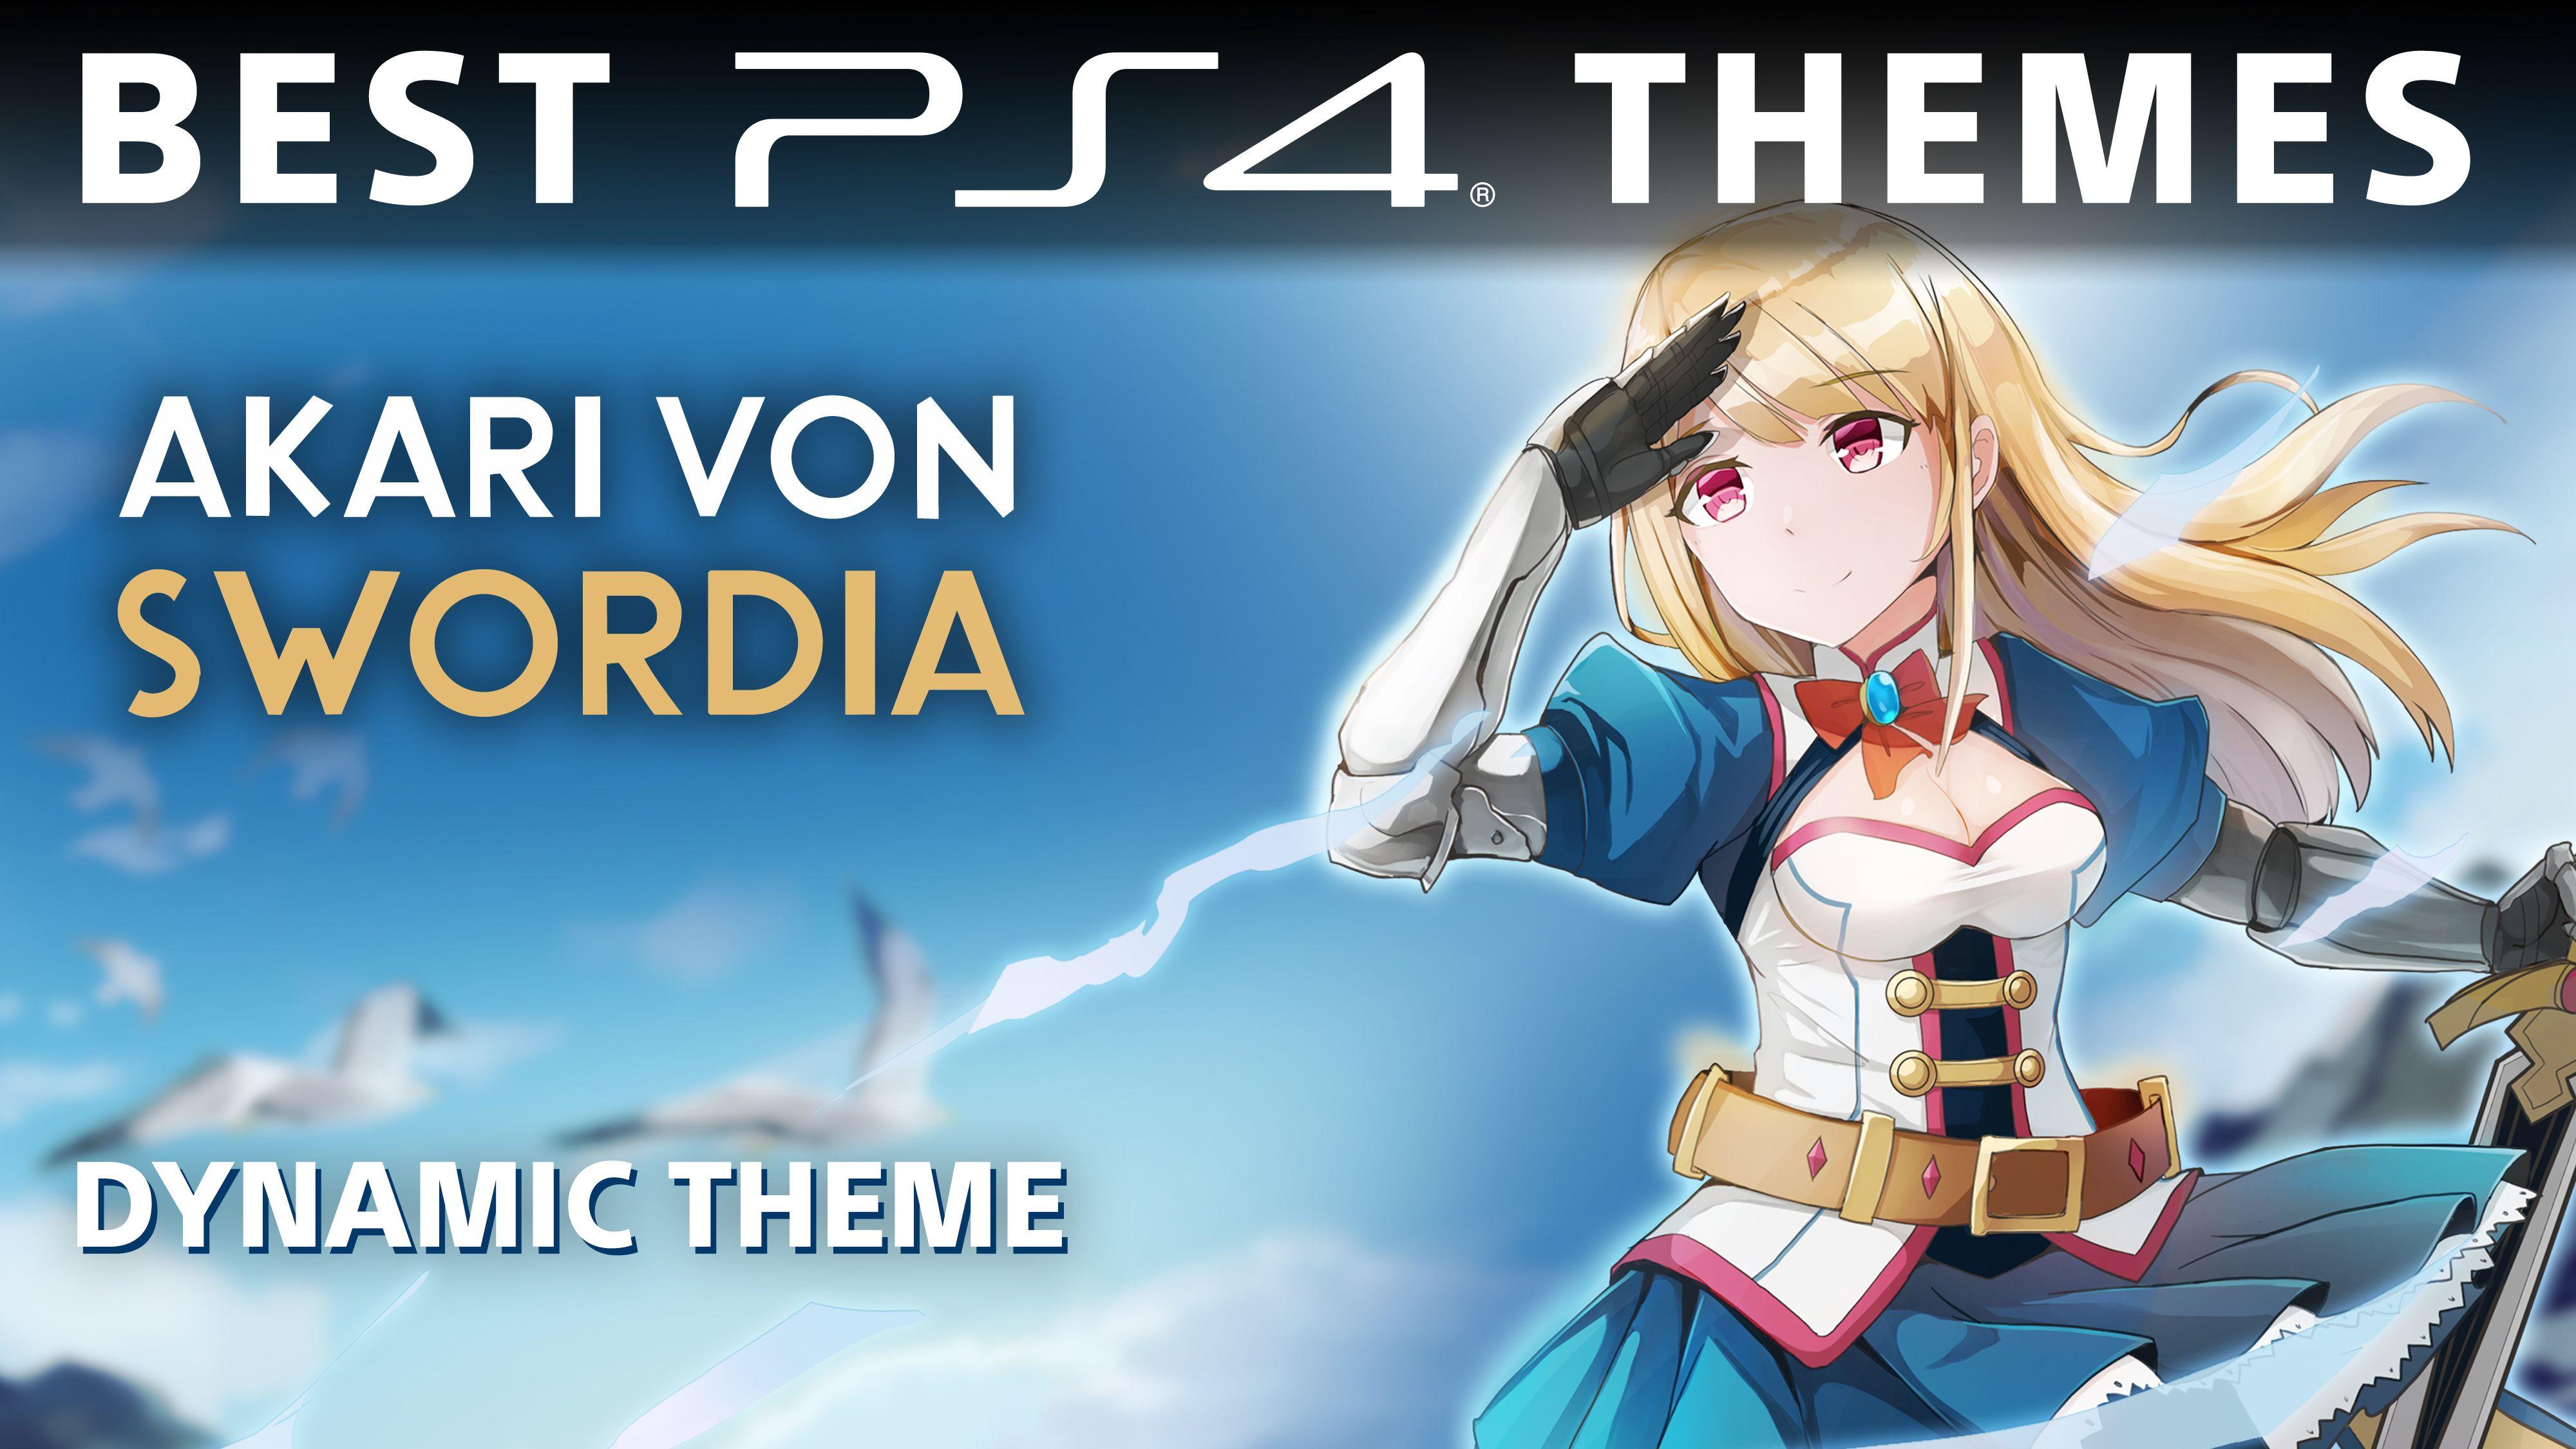 theme anime: Best Anime Themes For Ps4